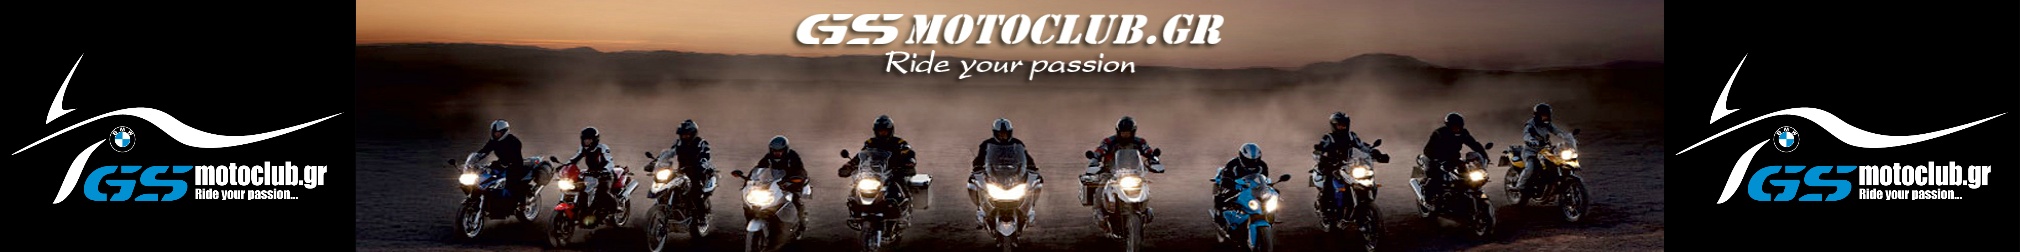 GsMotoclub.gr - Ride your passion...